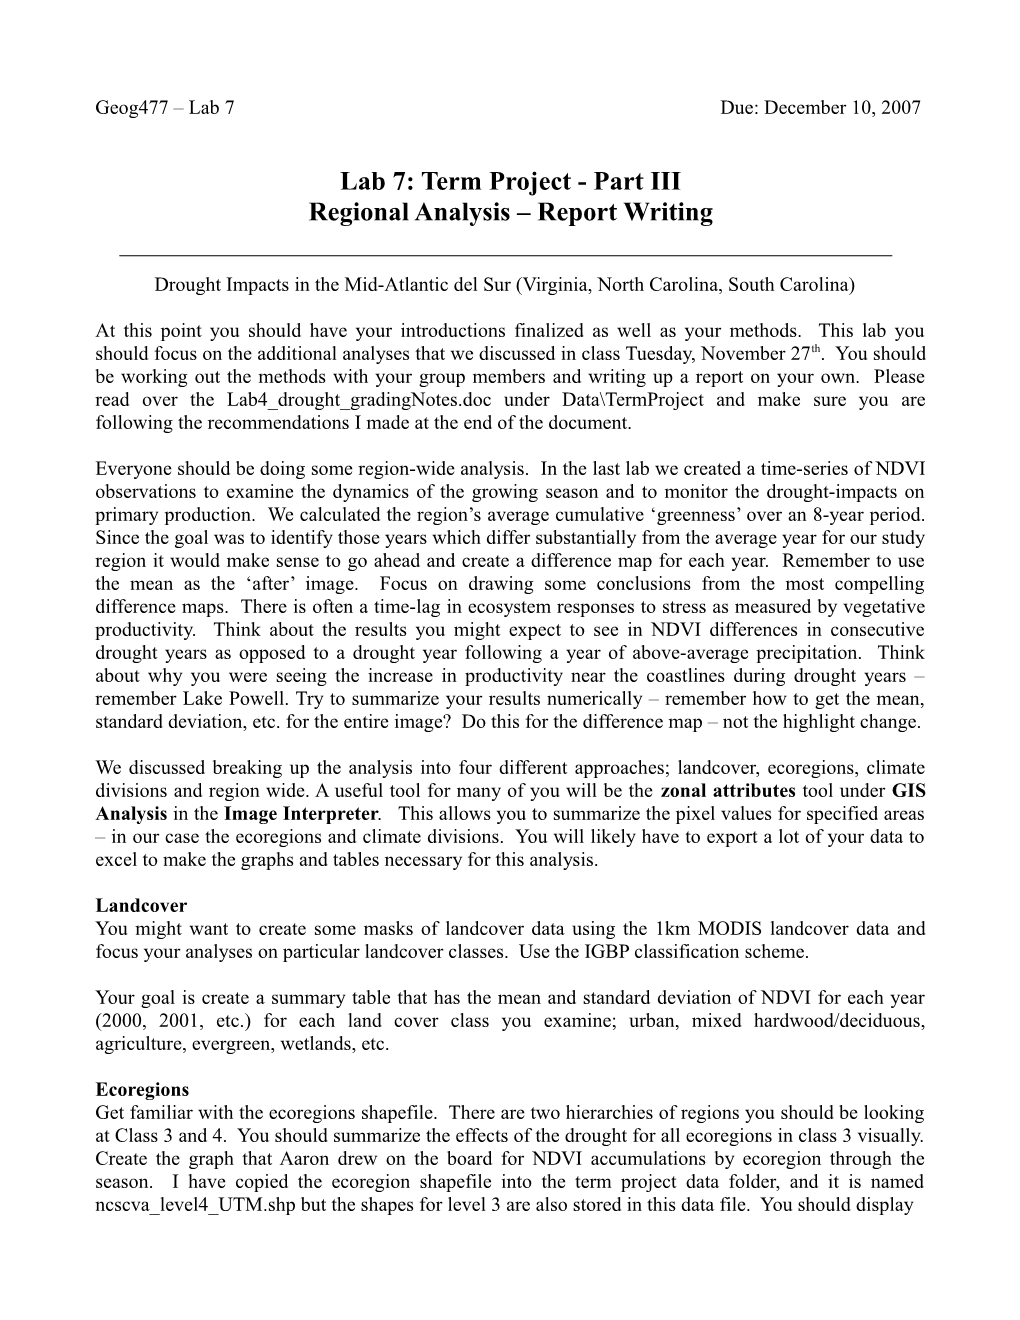 Lab 6: Term Project Part II